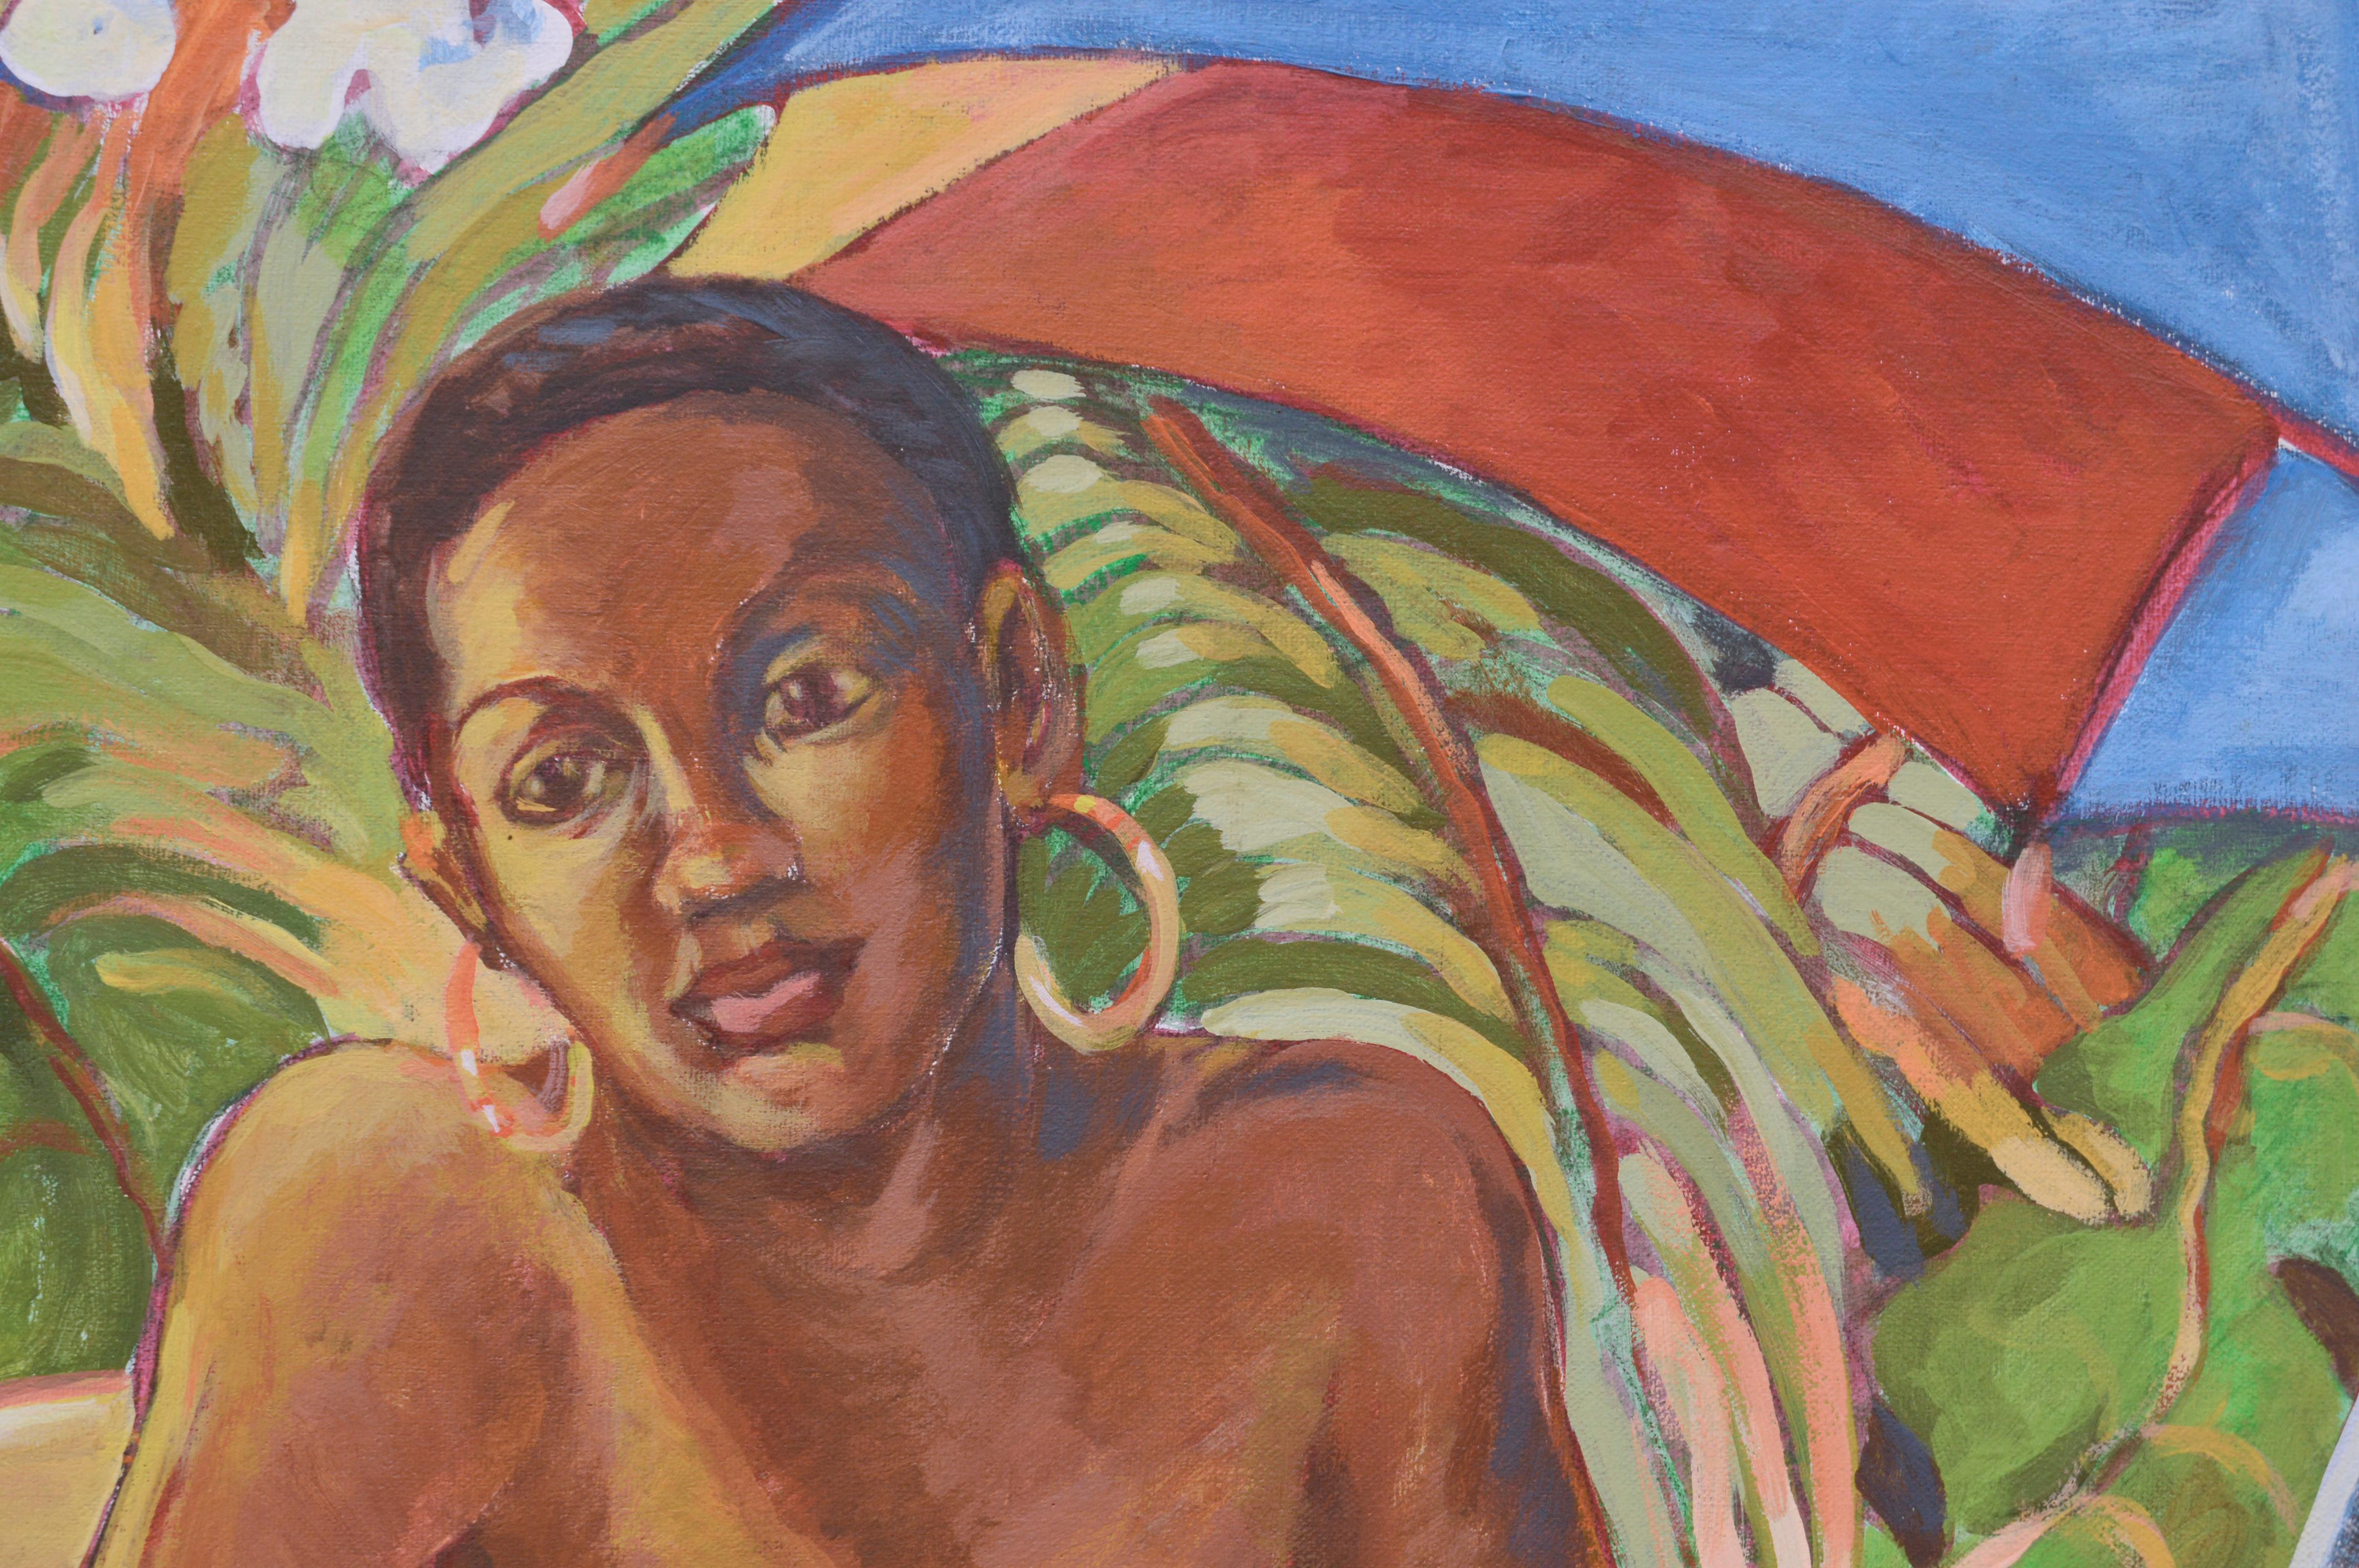 Portrait of a Woman with Teapot and Tropical Plants - Painting by R. A. Bobbie Dixon